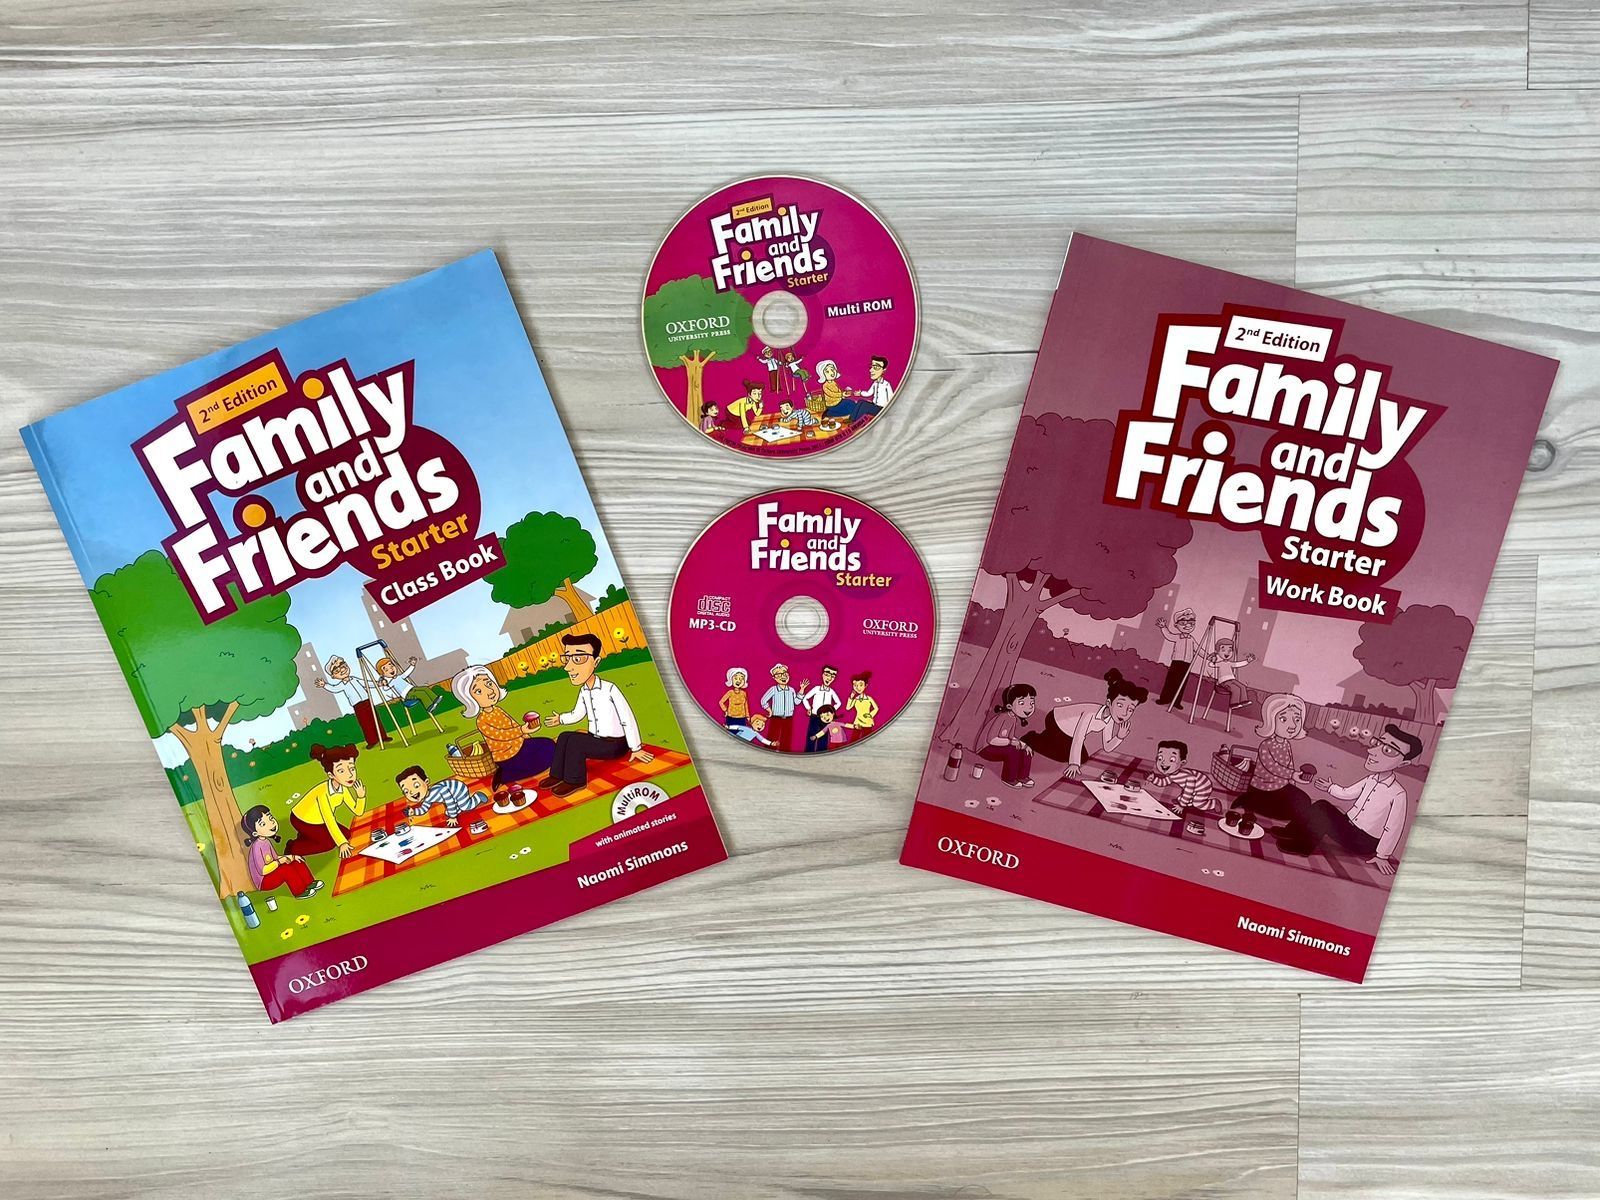 Family and friends 2 2nd Edition Classbook. Комплект Family and friends 1 (2nd Edition) class book + Workbook + CD. Family and friends Starter class book. Family and friends 3 2nd Edition. Friends starter 1